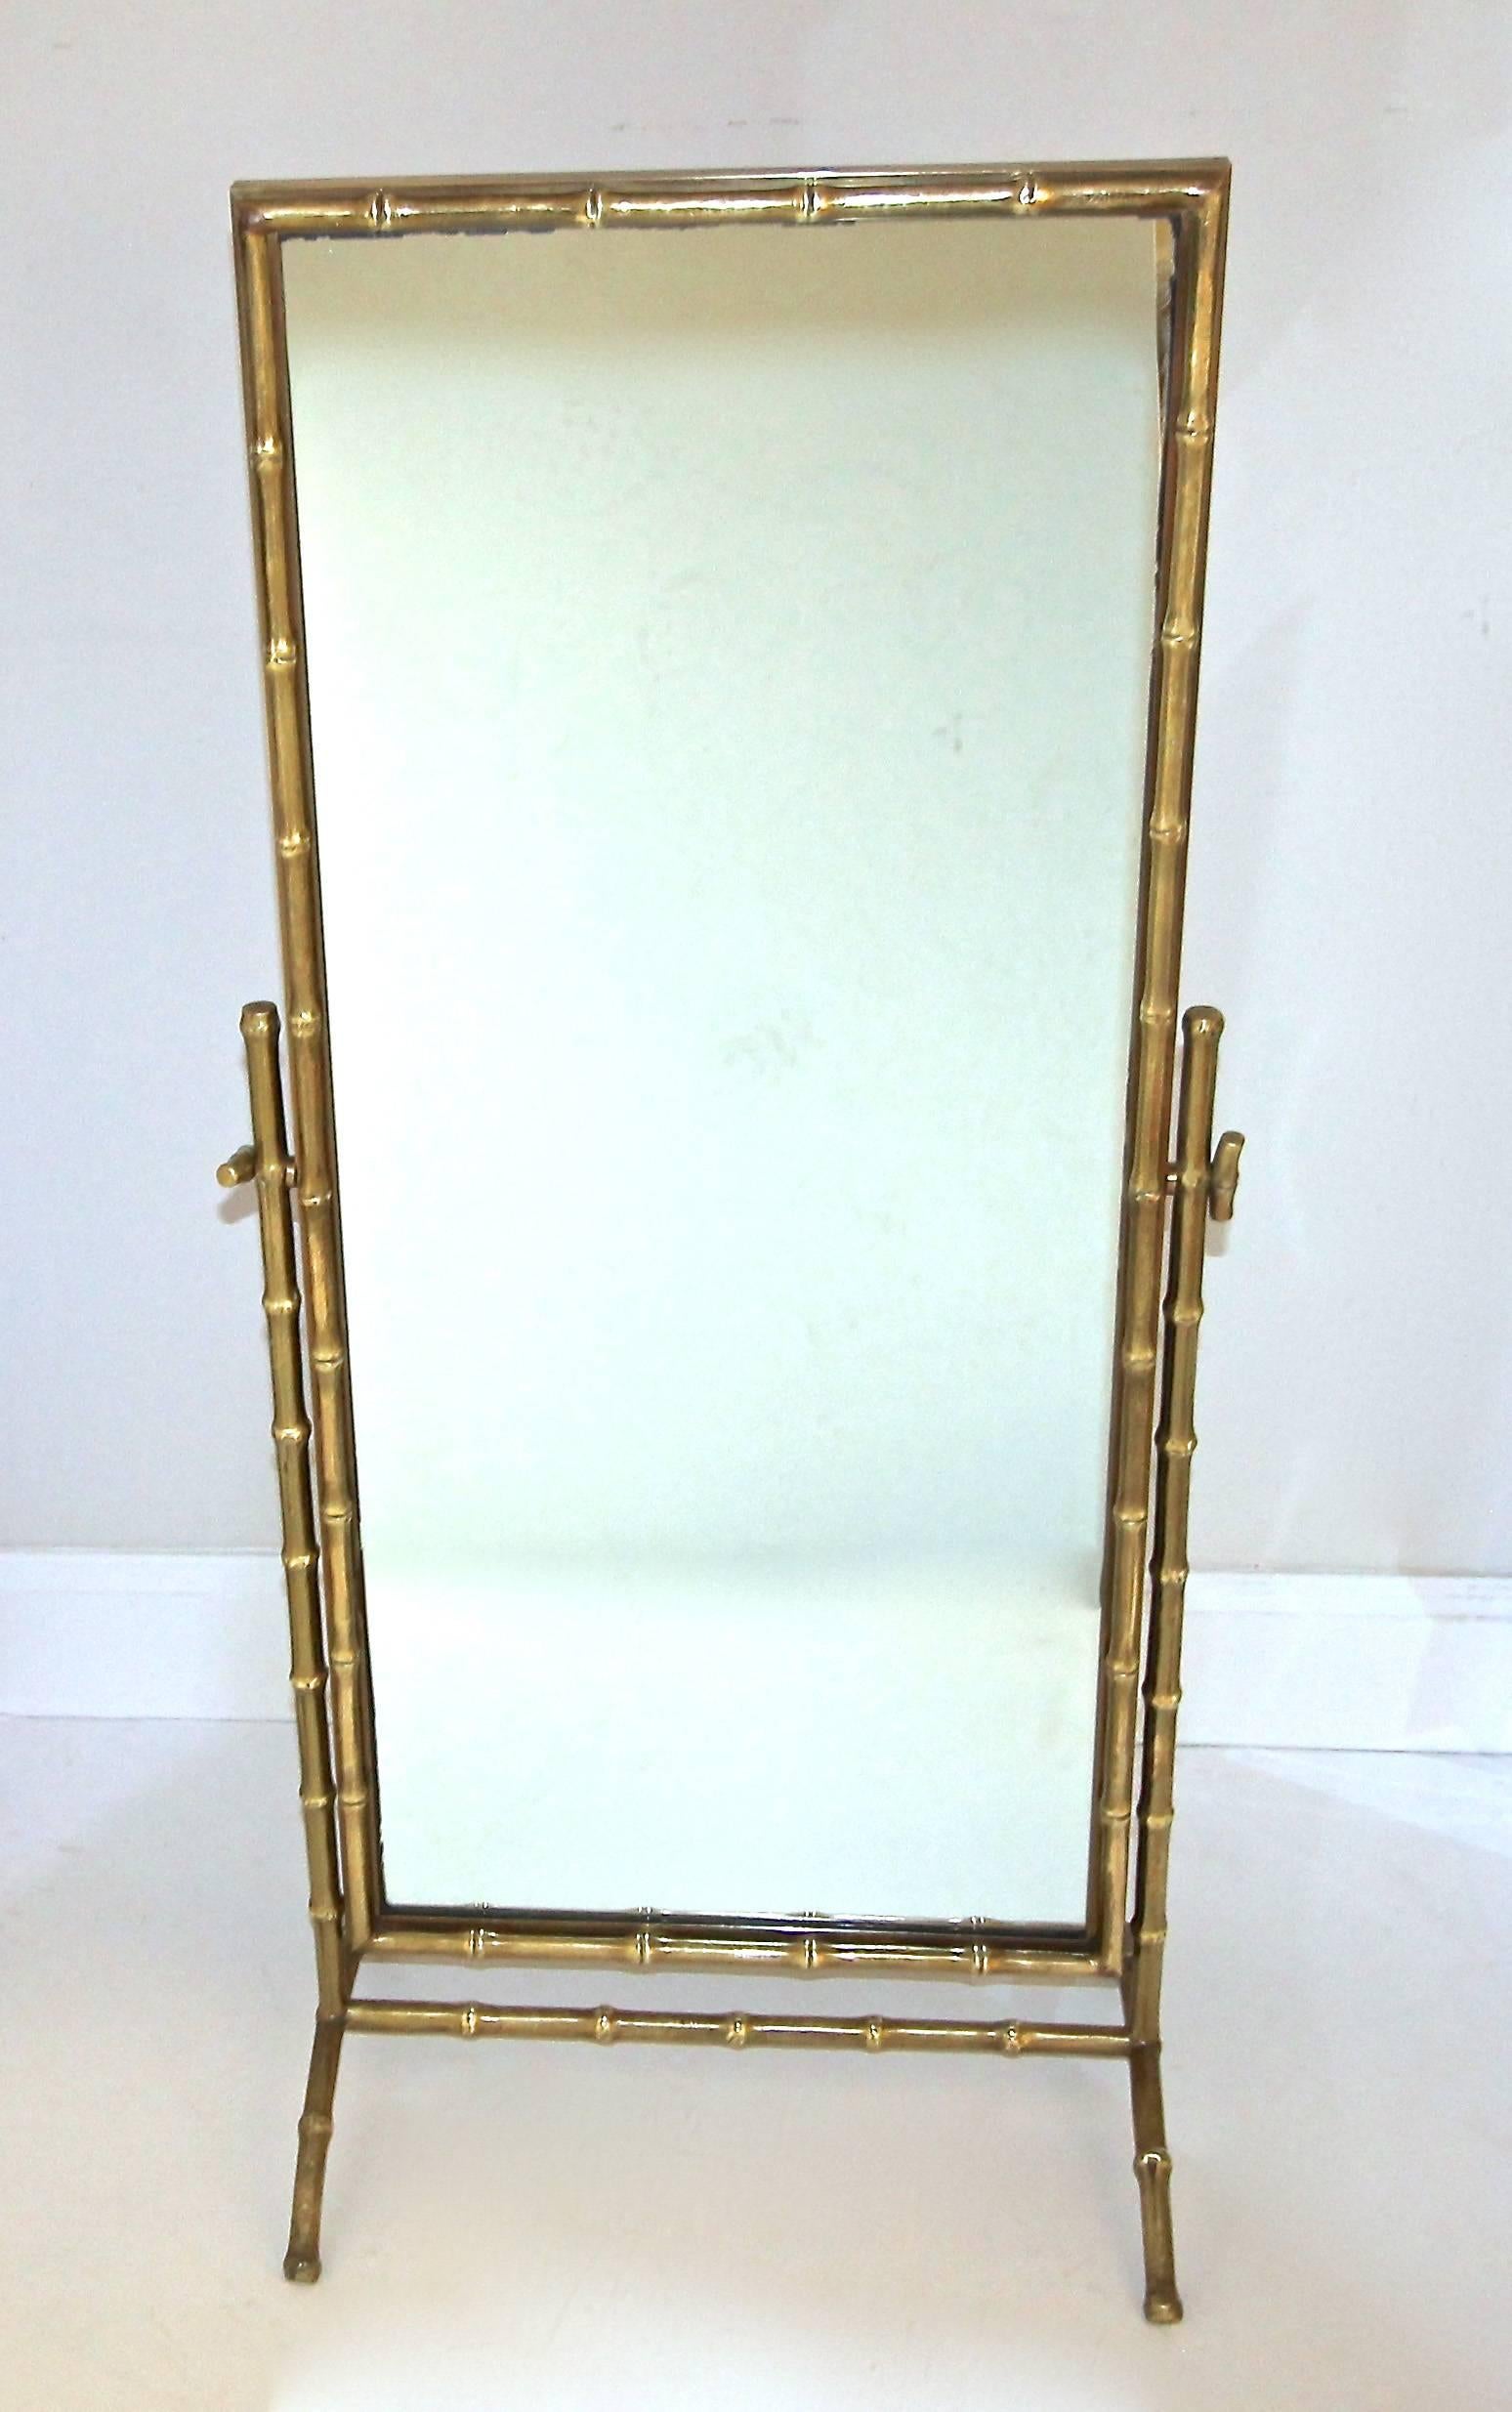 Rare French faux bronze bamboo cheval floor or dresser mirror, attributed to Maison Bagues. Framed mirror pivots with smart bamboo handles at side.